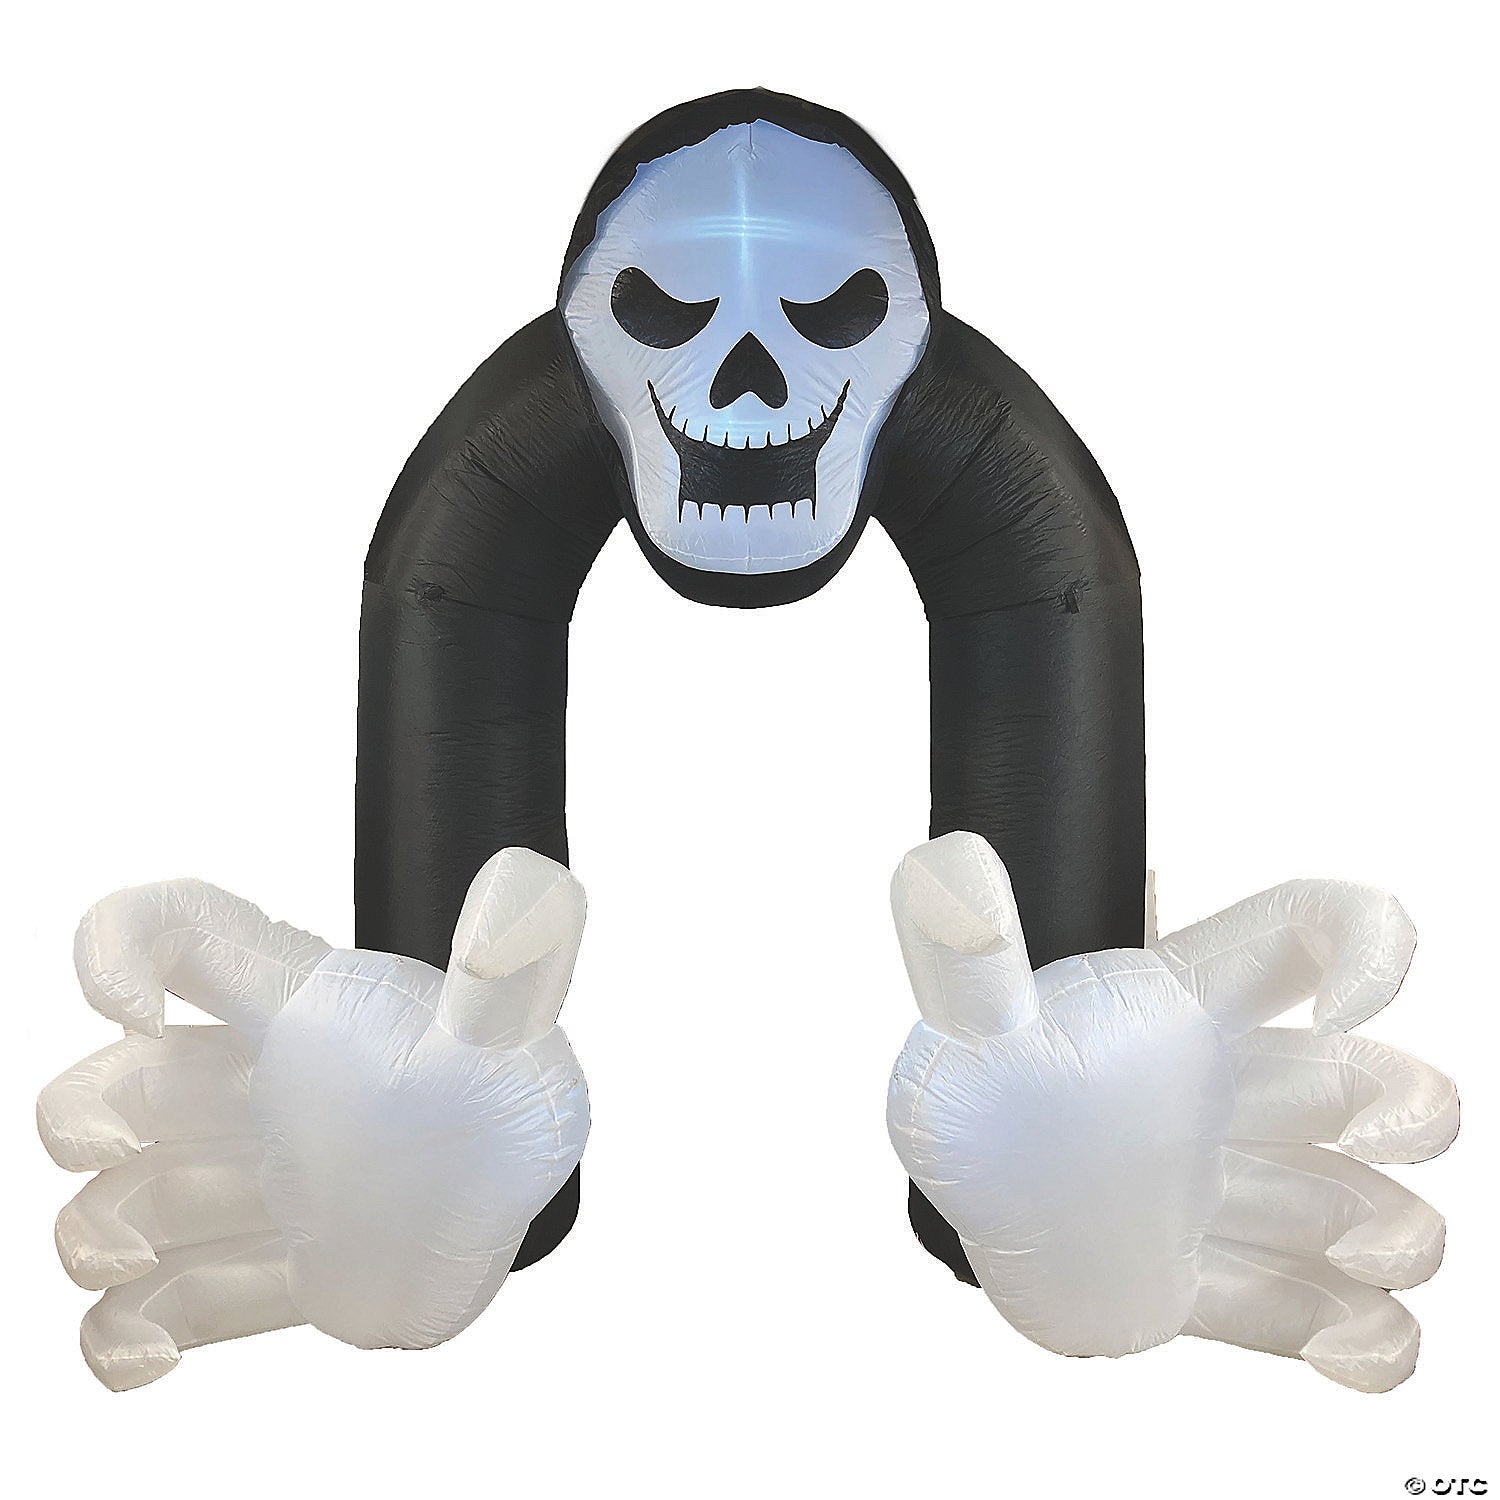 13-blow-up-inflatable-reaper-archway-outdoor-yard-decoration